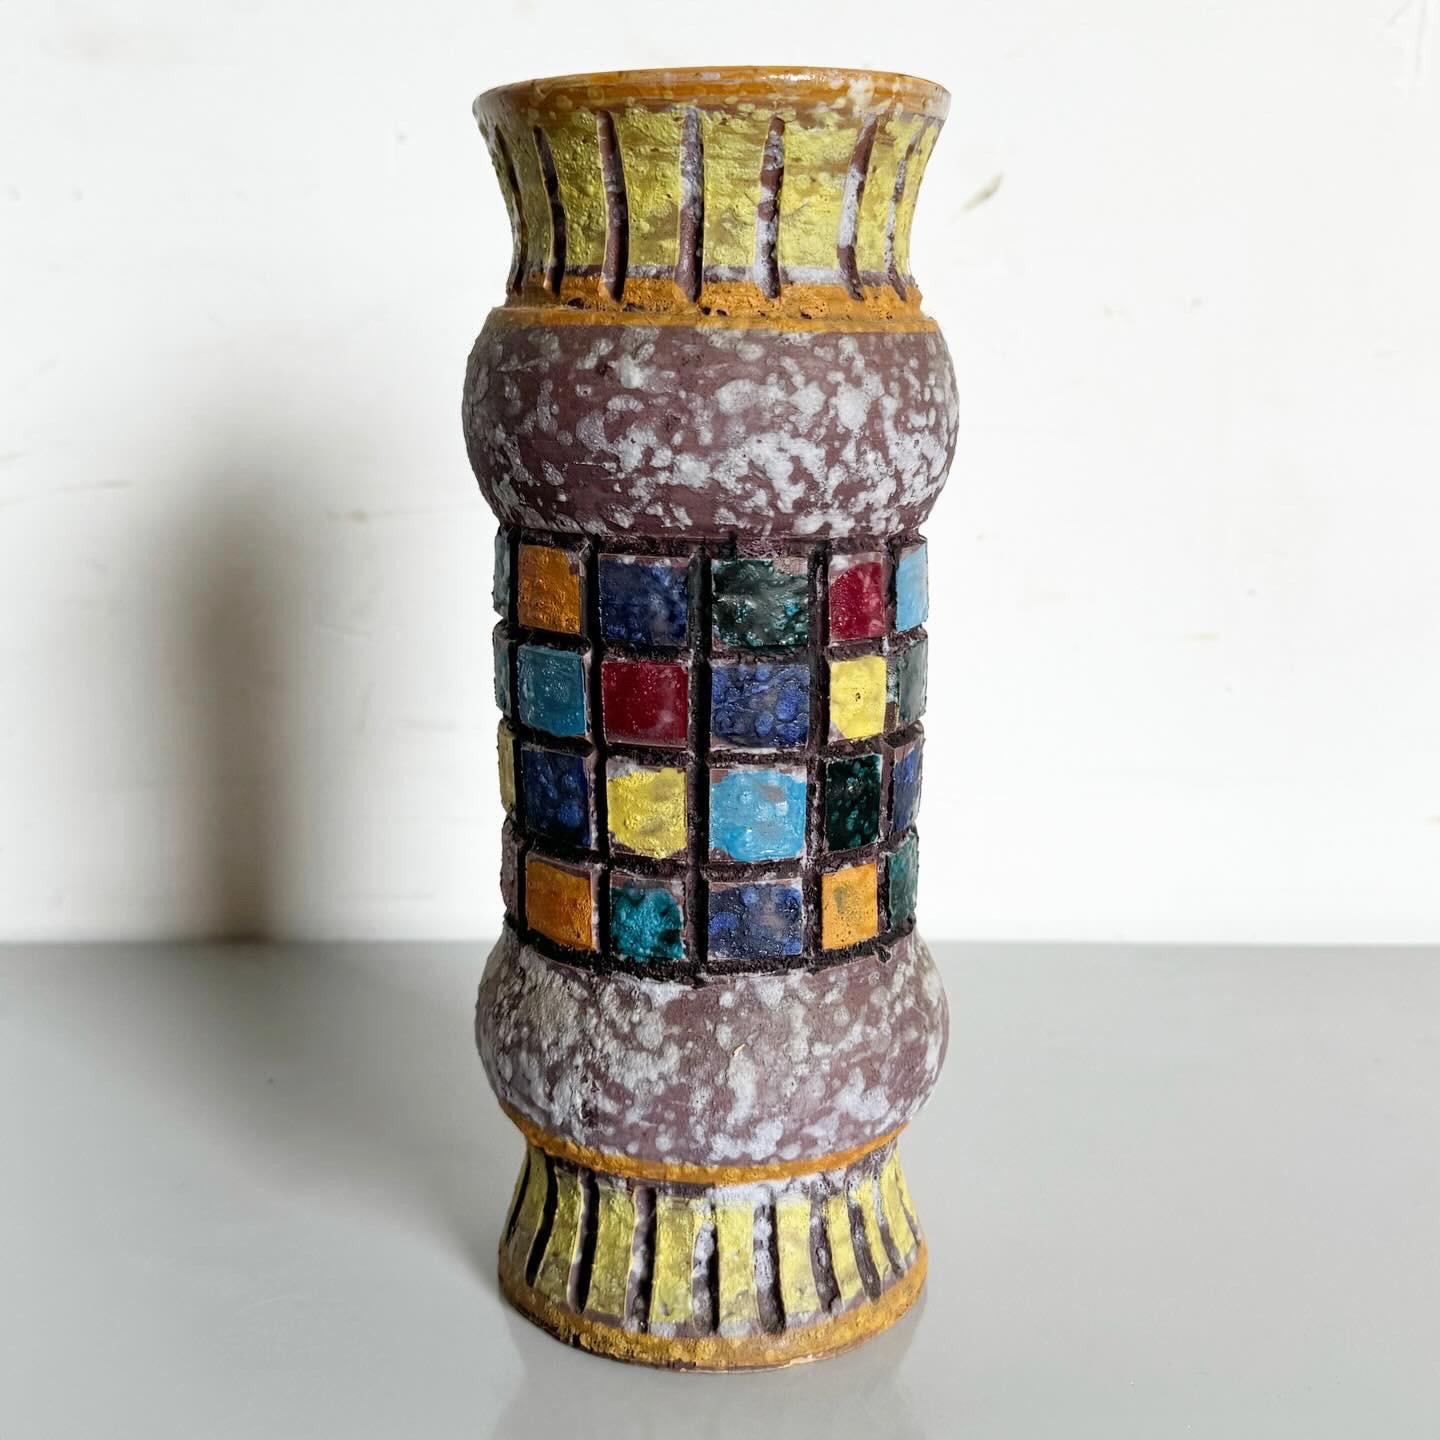 Add a splash of retro elegance to your decor with this Post-Modern Mid Century Table Vase. The vase showcases a sleek design adorned with multicolored square patterns, embodying mid-century Post-Modern aesthetics. Its vibrant motifs against a simple